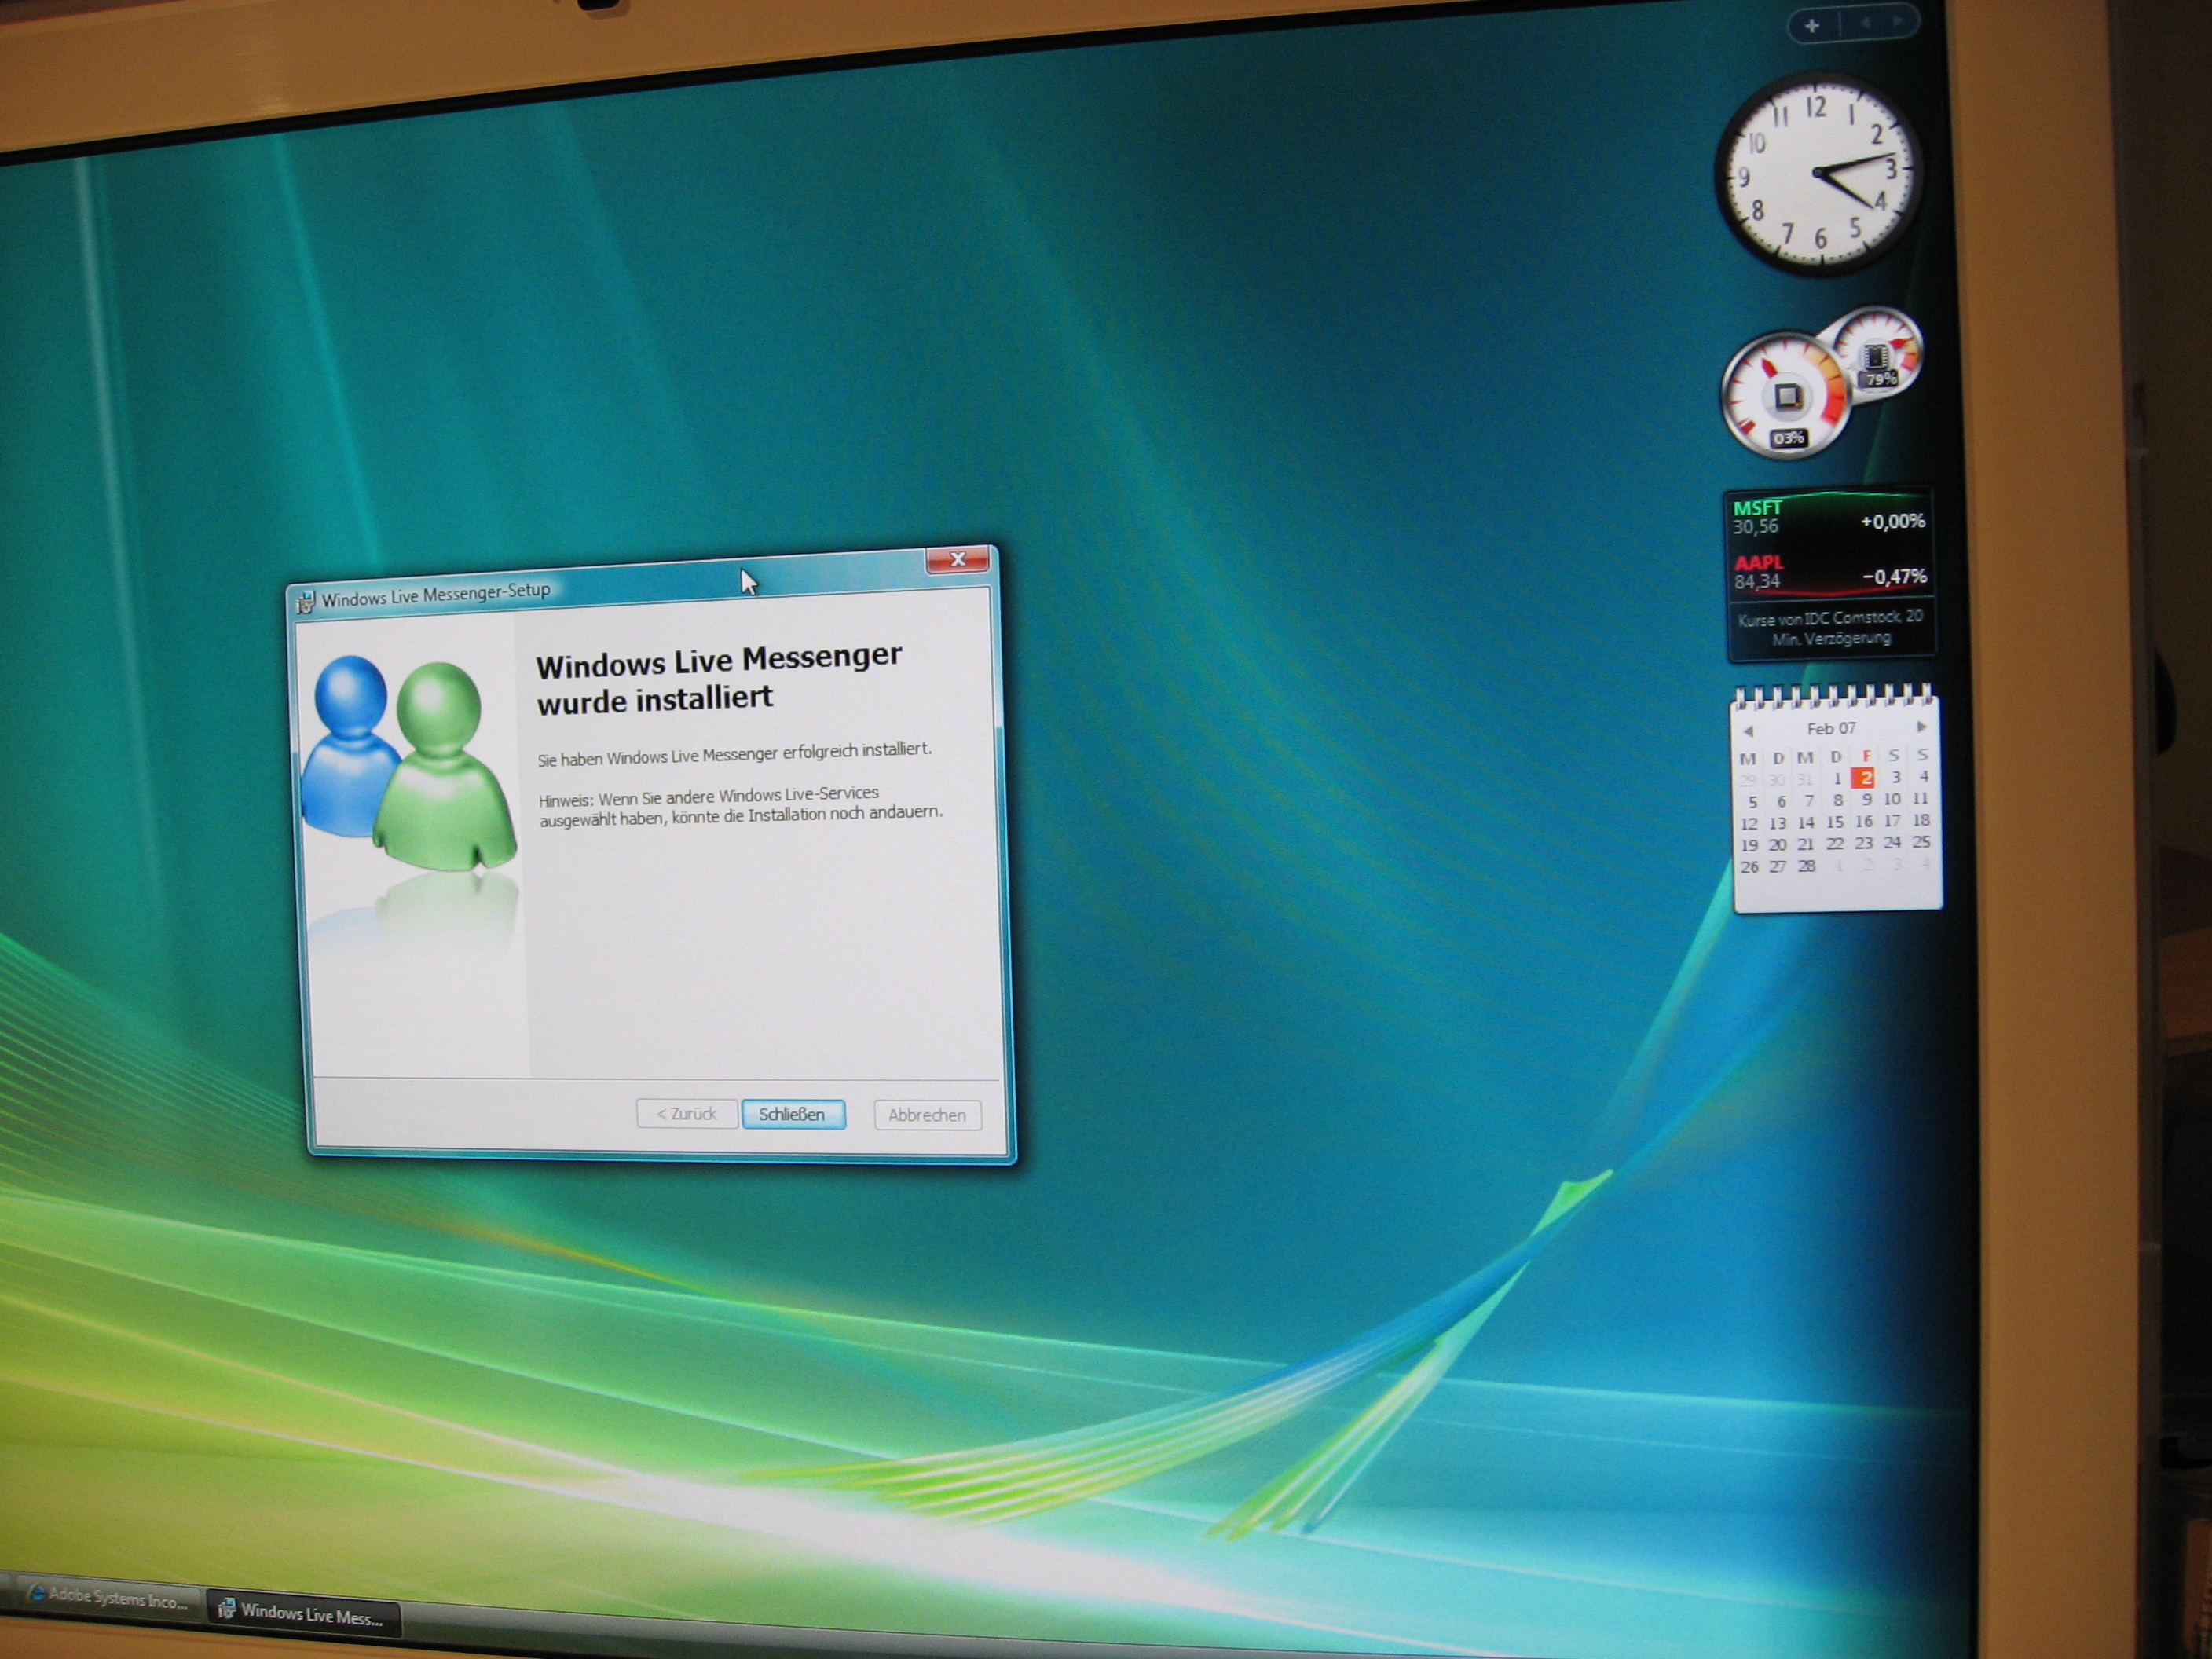 Windows Live Messenger installation prompt on a computer screen with desktop widgets visible